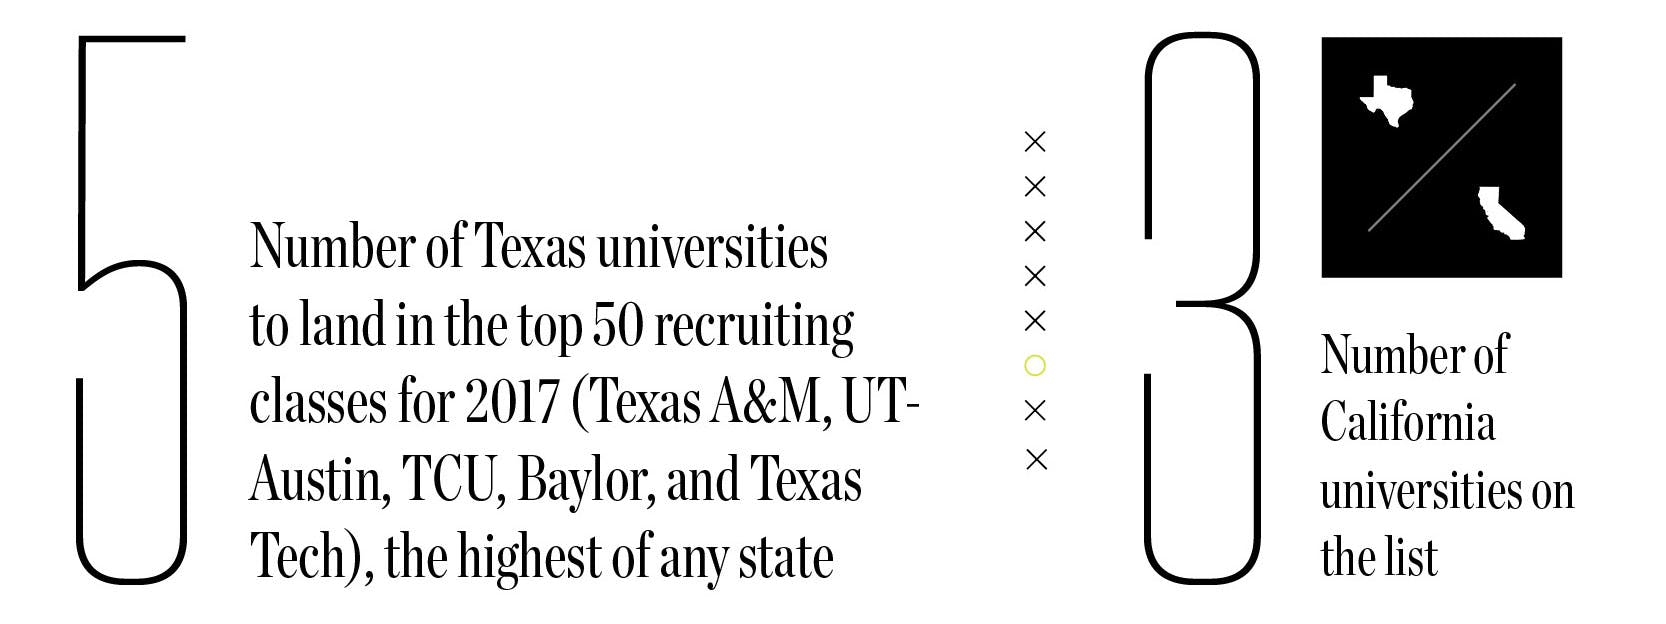 5: Number of Texas universities to land in the top 50 recruiting classes for 2017 (Texas A&M, UT-Austin, TCU, Baylor, and Texas Tech), the highest of any state. 3: Number of California universities on the list.